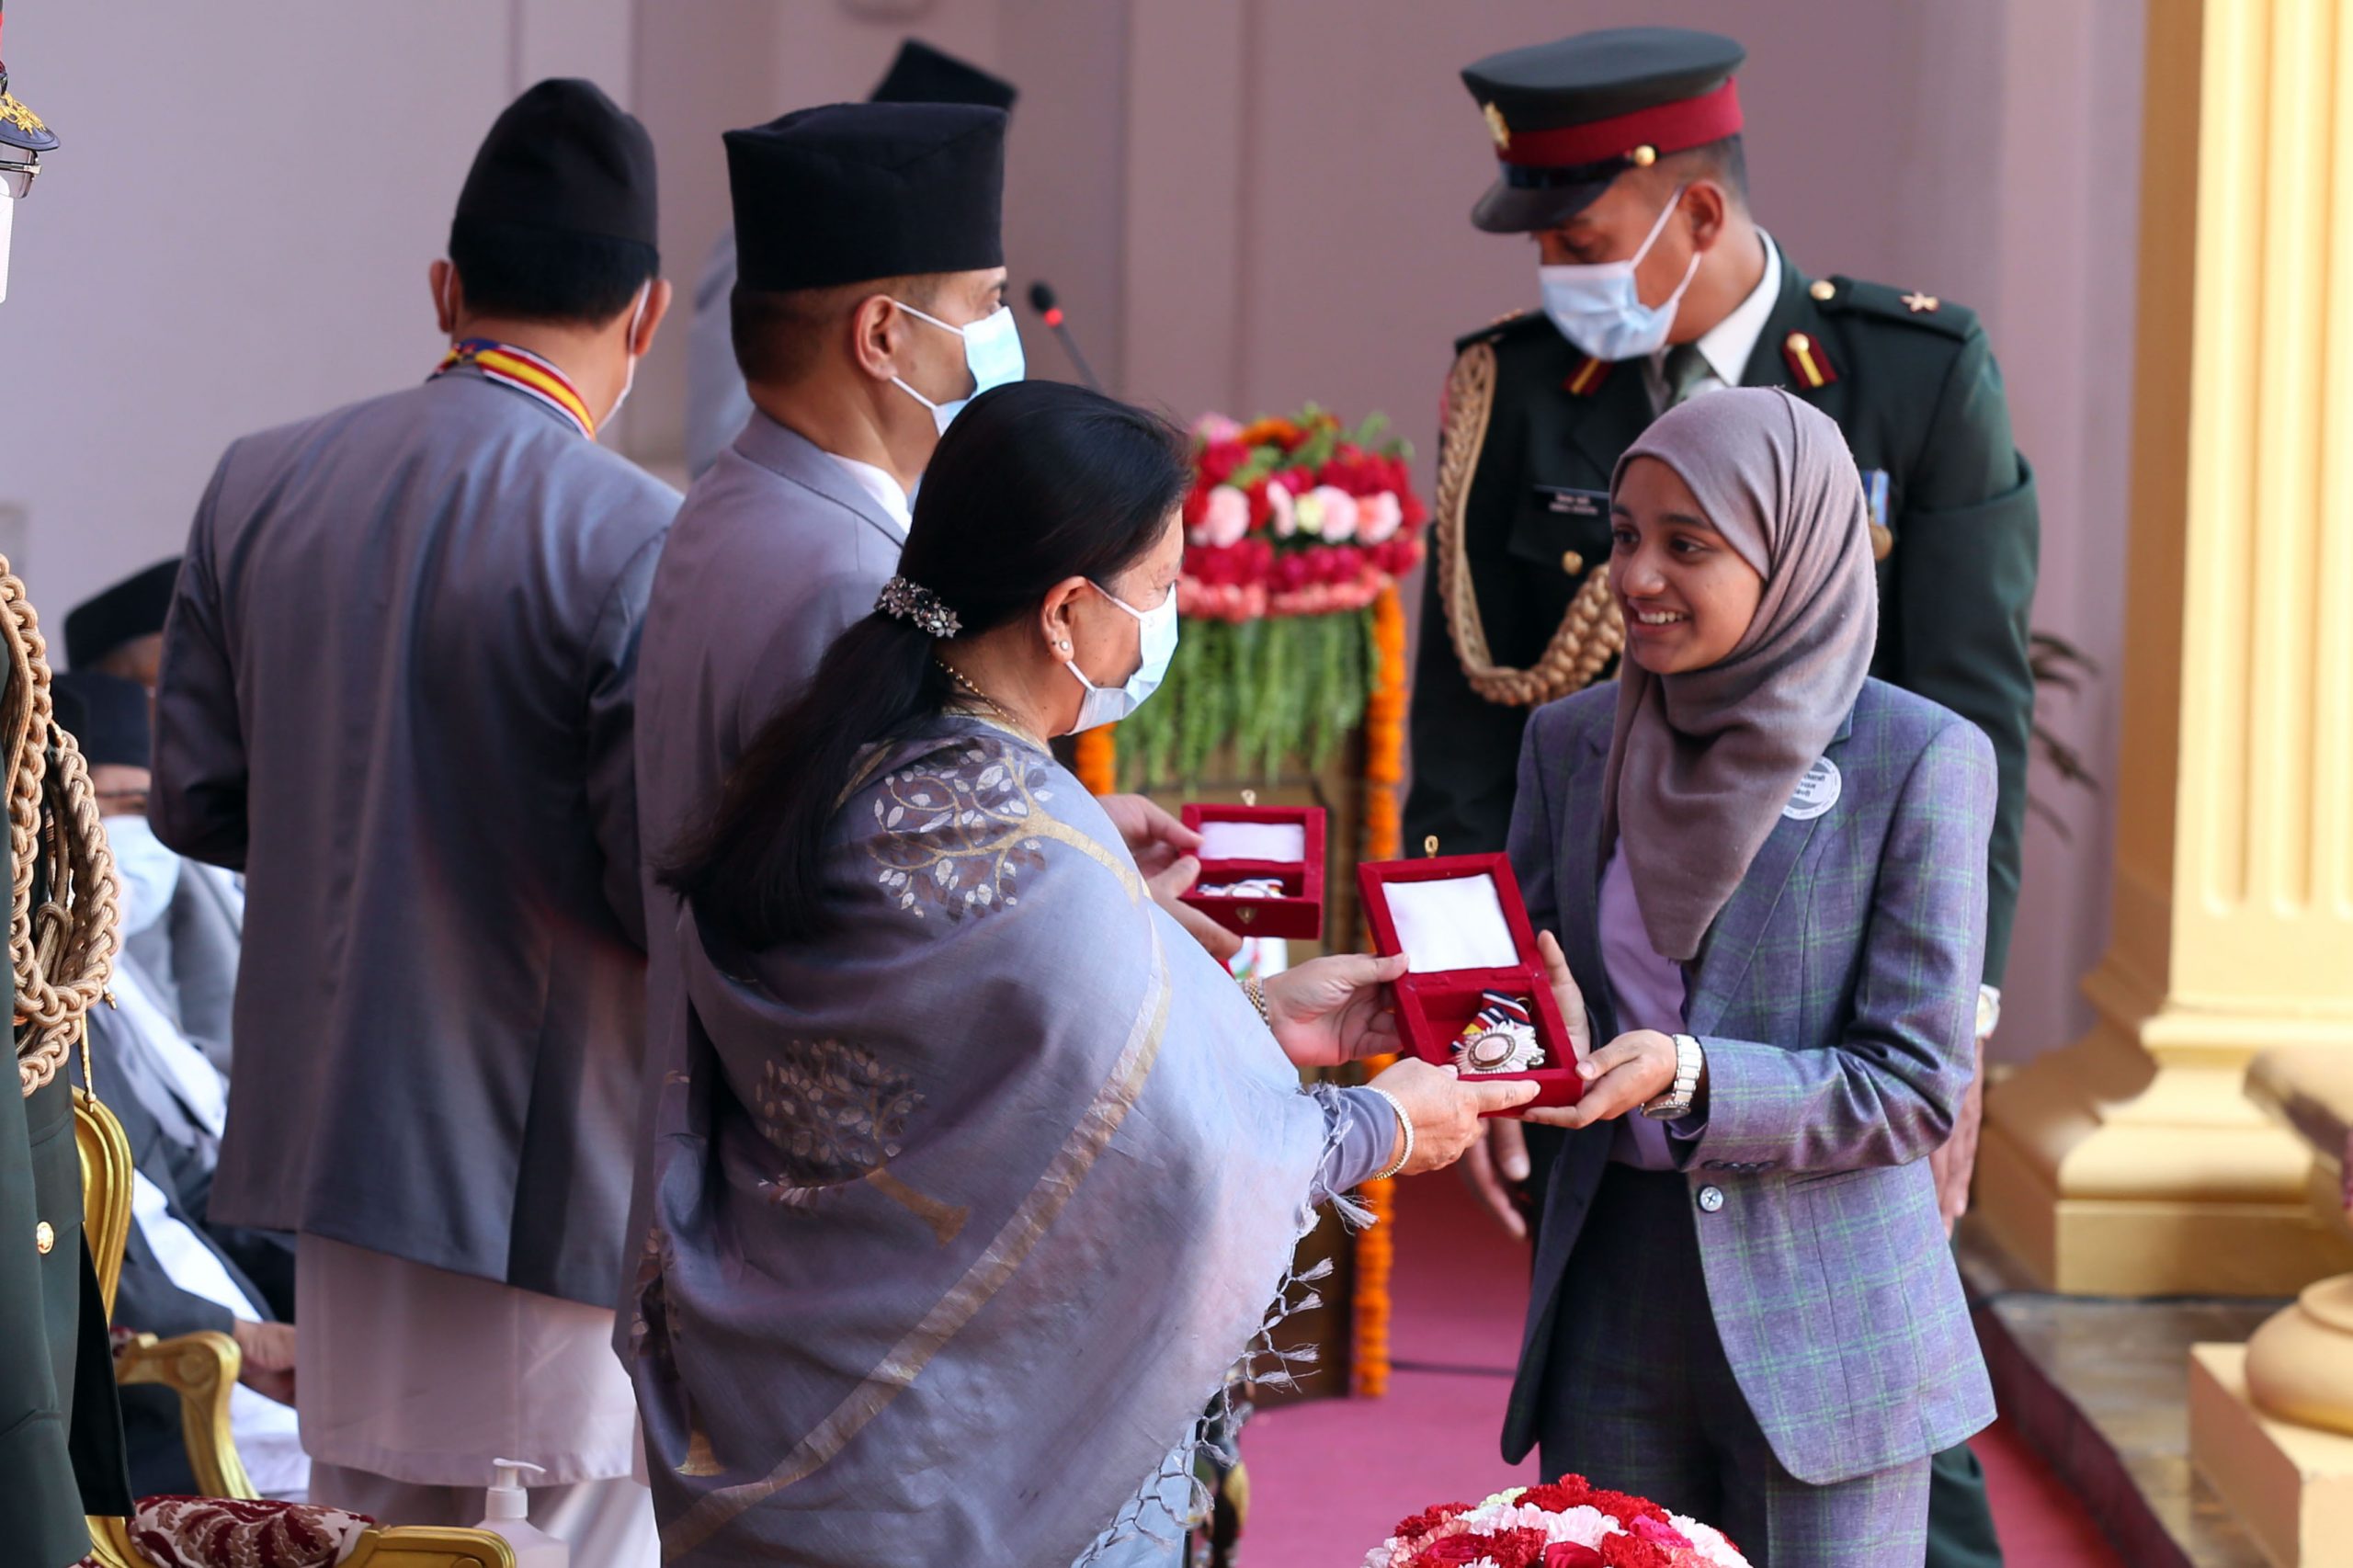 President Bidya Devi Bhandari today decorated distinguished persons, civil servants and individuals from the social sector with various decorations and titles which were announced on the occasion of the Constitution Day (National Day) in September 2021.